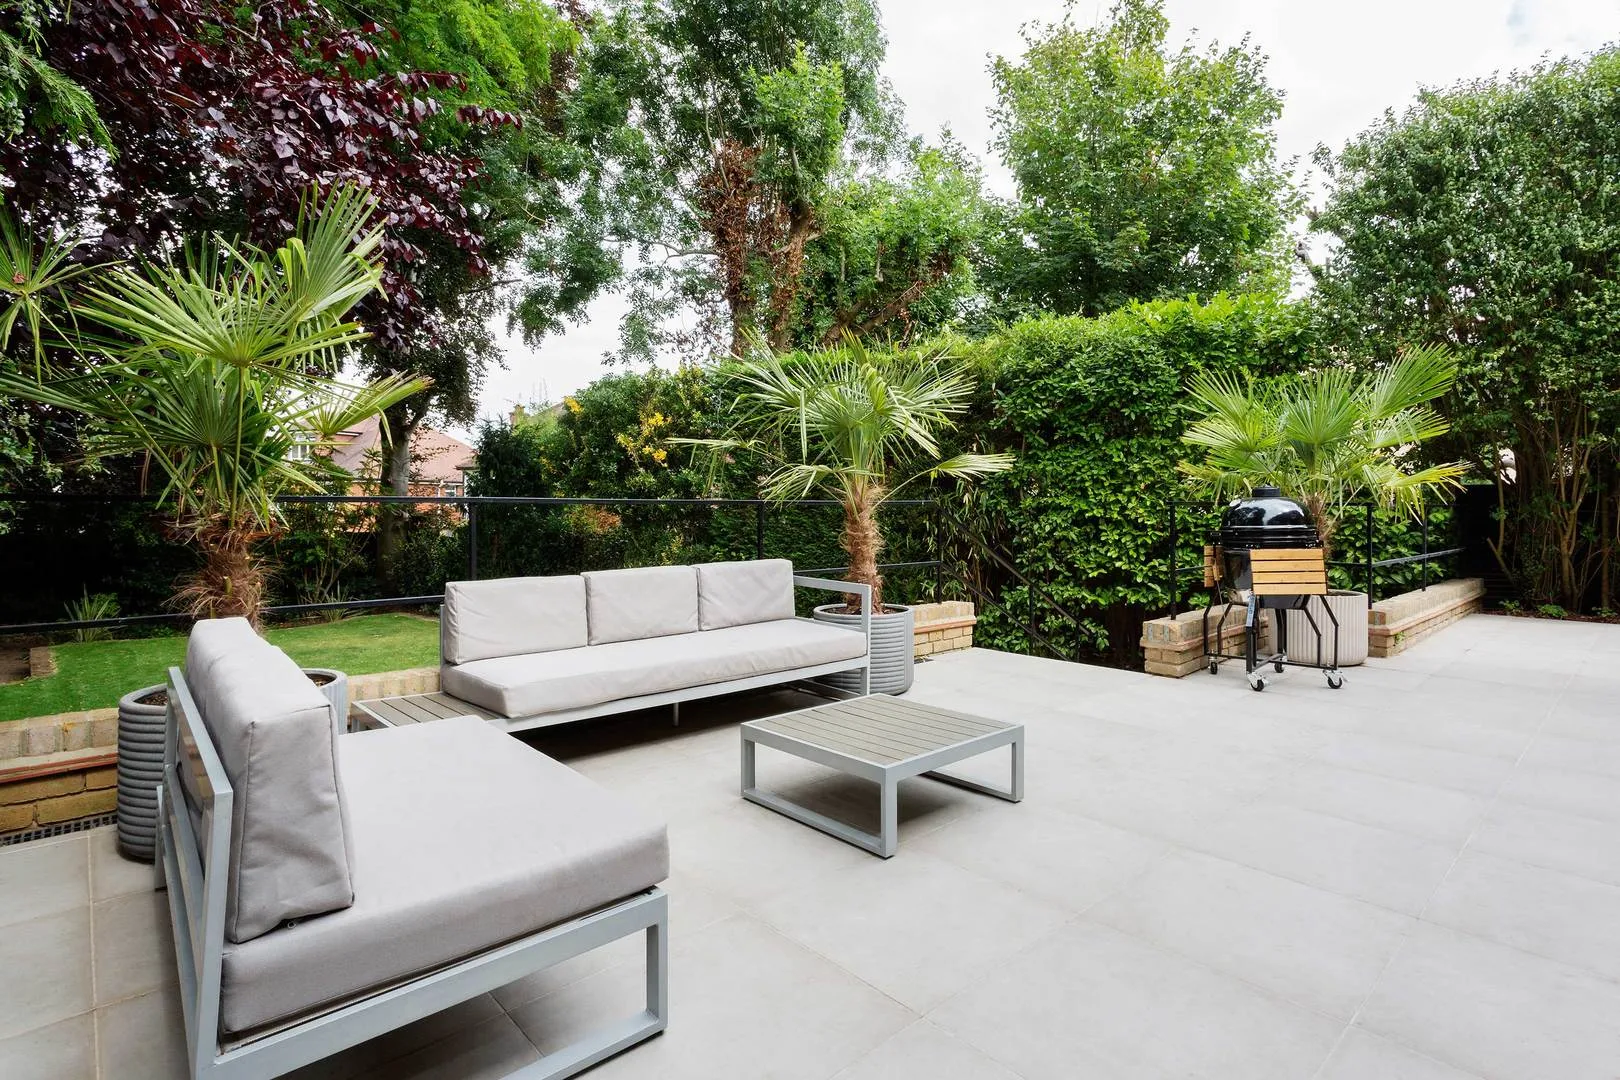 Princes Way, holiday home in Wimbledon, London